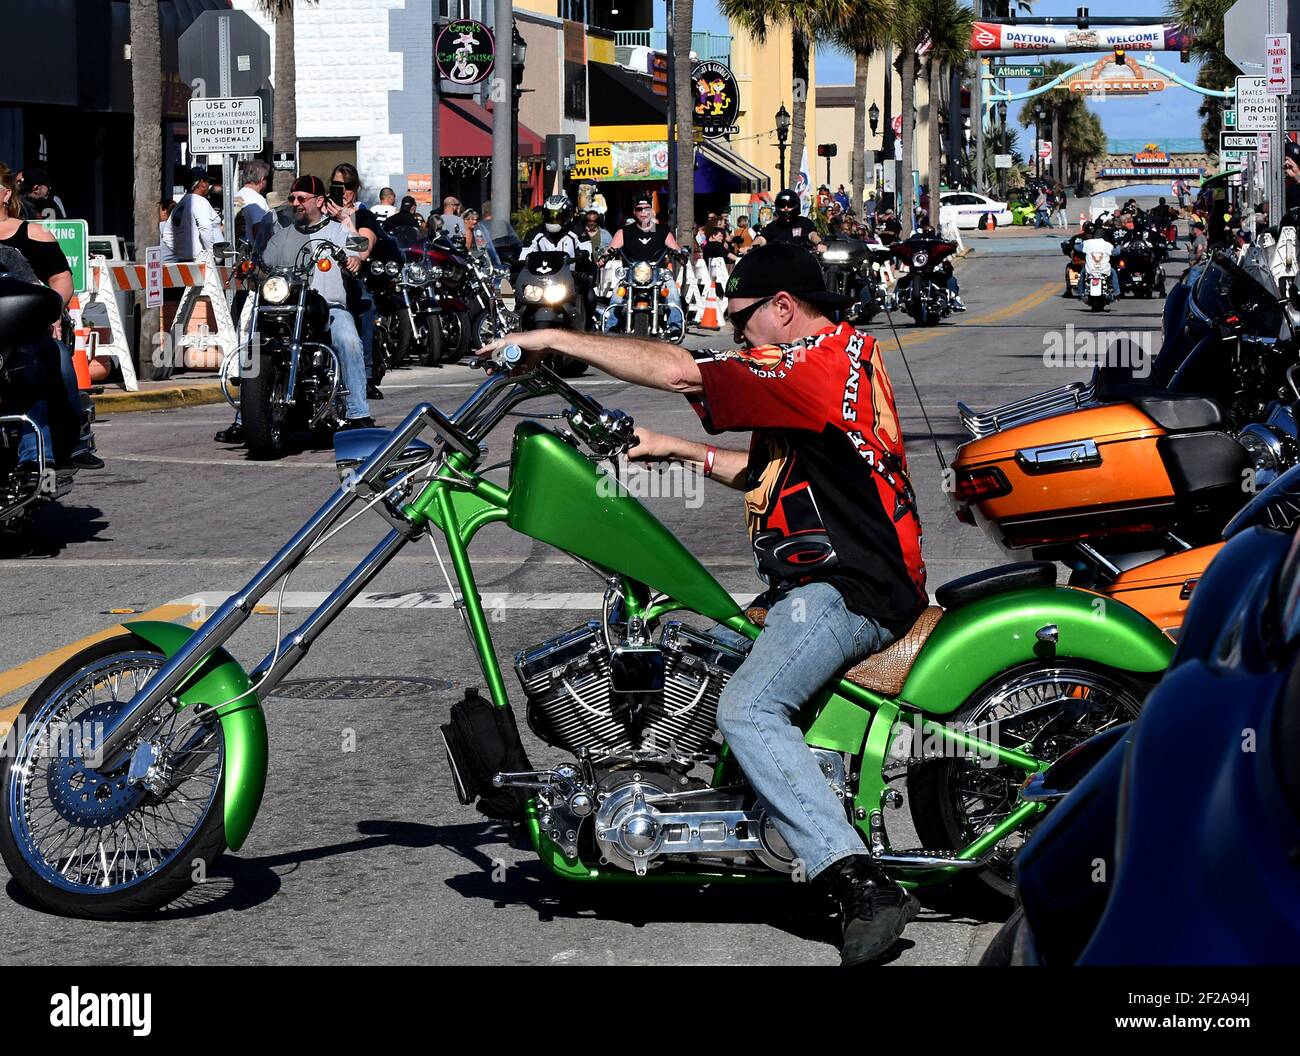 Daytona Beach, United States. 10th Mar, 2021. Motorcyclists ride down Main Street during the 80th year of Daytona Beach's annual Bike Week event. Few people were seen wearing face masks or practicing social distancing and some worry the gathering could become a superspreader event as the coronavirus pandemic continues. Credit: SOPA Images Limited/Alamy Live News Stock Photo